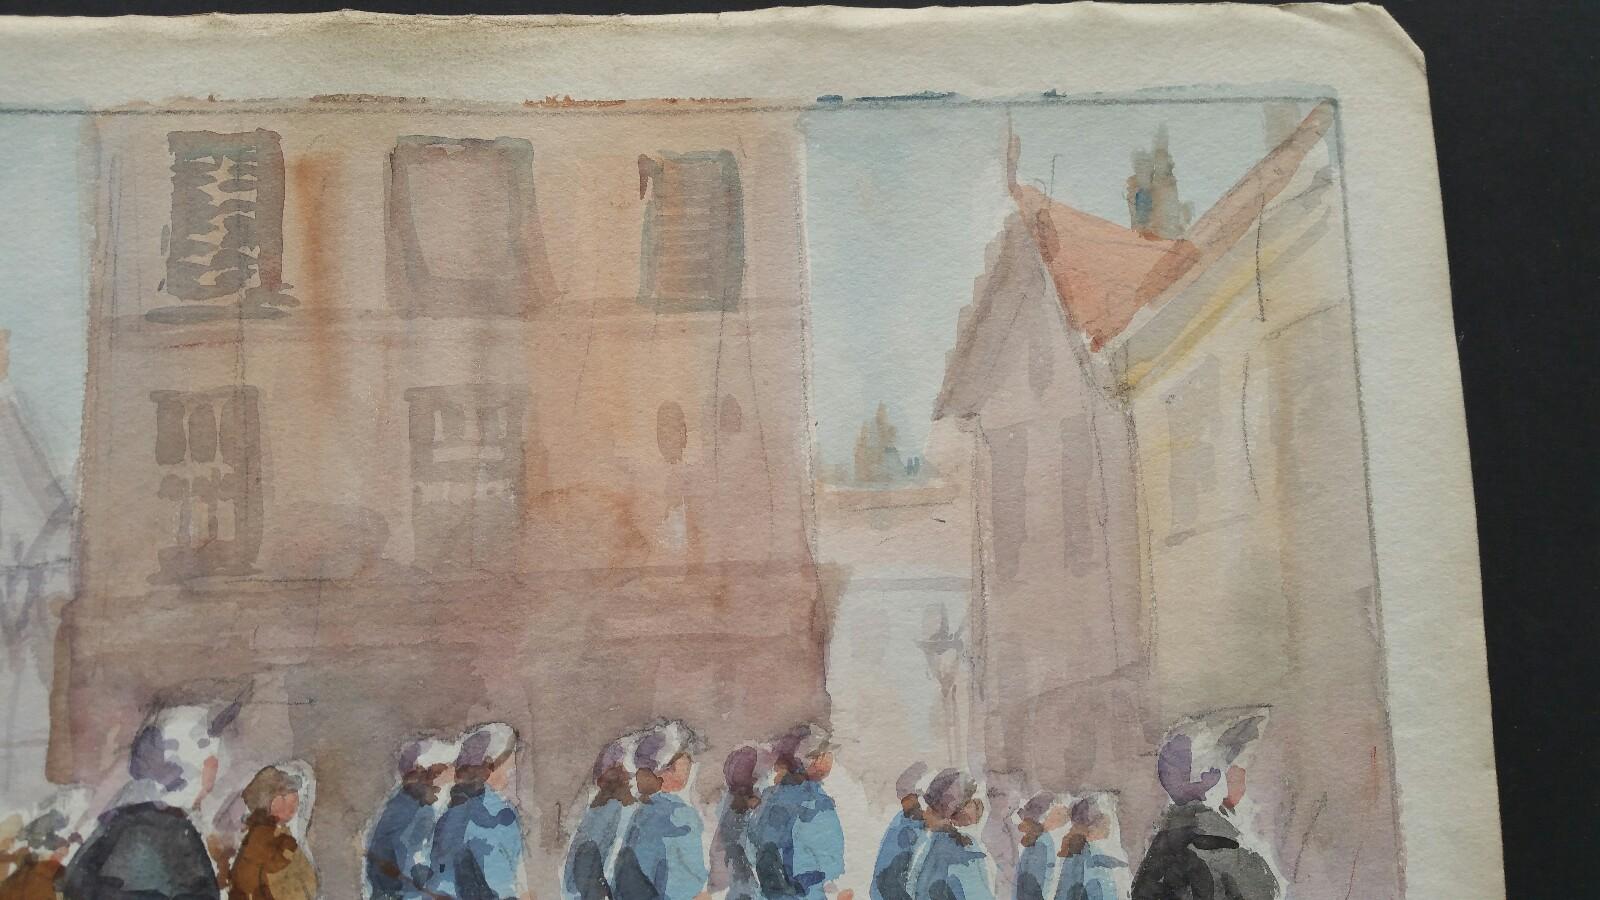 Luxembourg: Procession of Orphanage Children
by Leonard Machin Rowe (1880-1968)
signed lower left
watercolour painting on artist's paper, unframed

Image: 9.75 x 13.5 inches, sheet 11.25 x 15 inches 

Fascinating painting by Leon. Rowe. It is